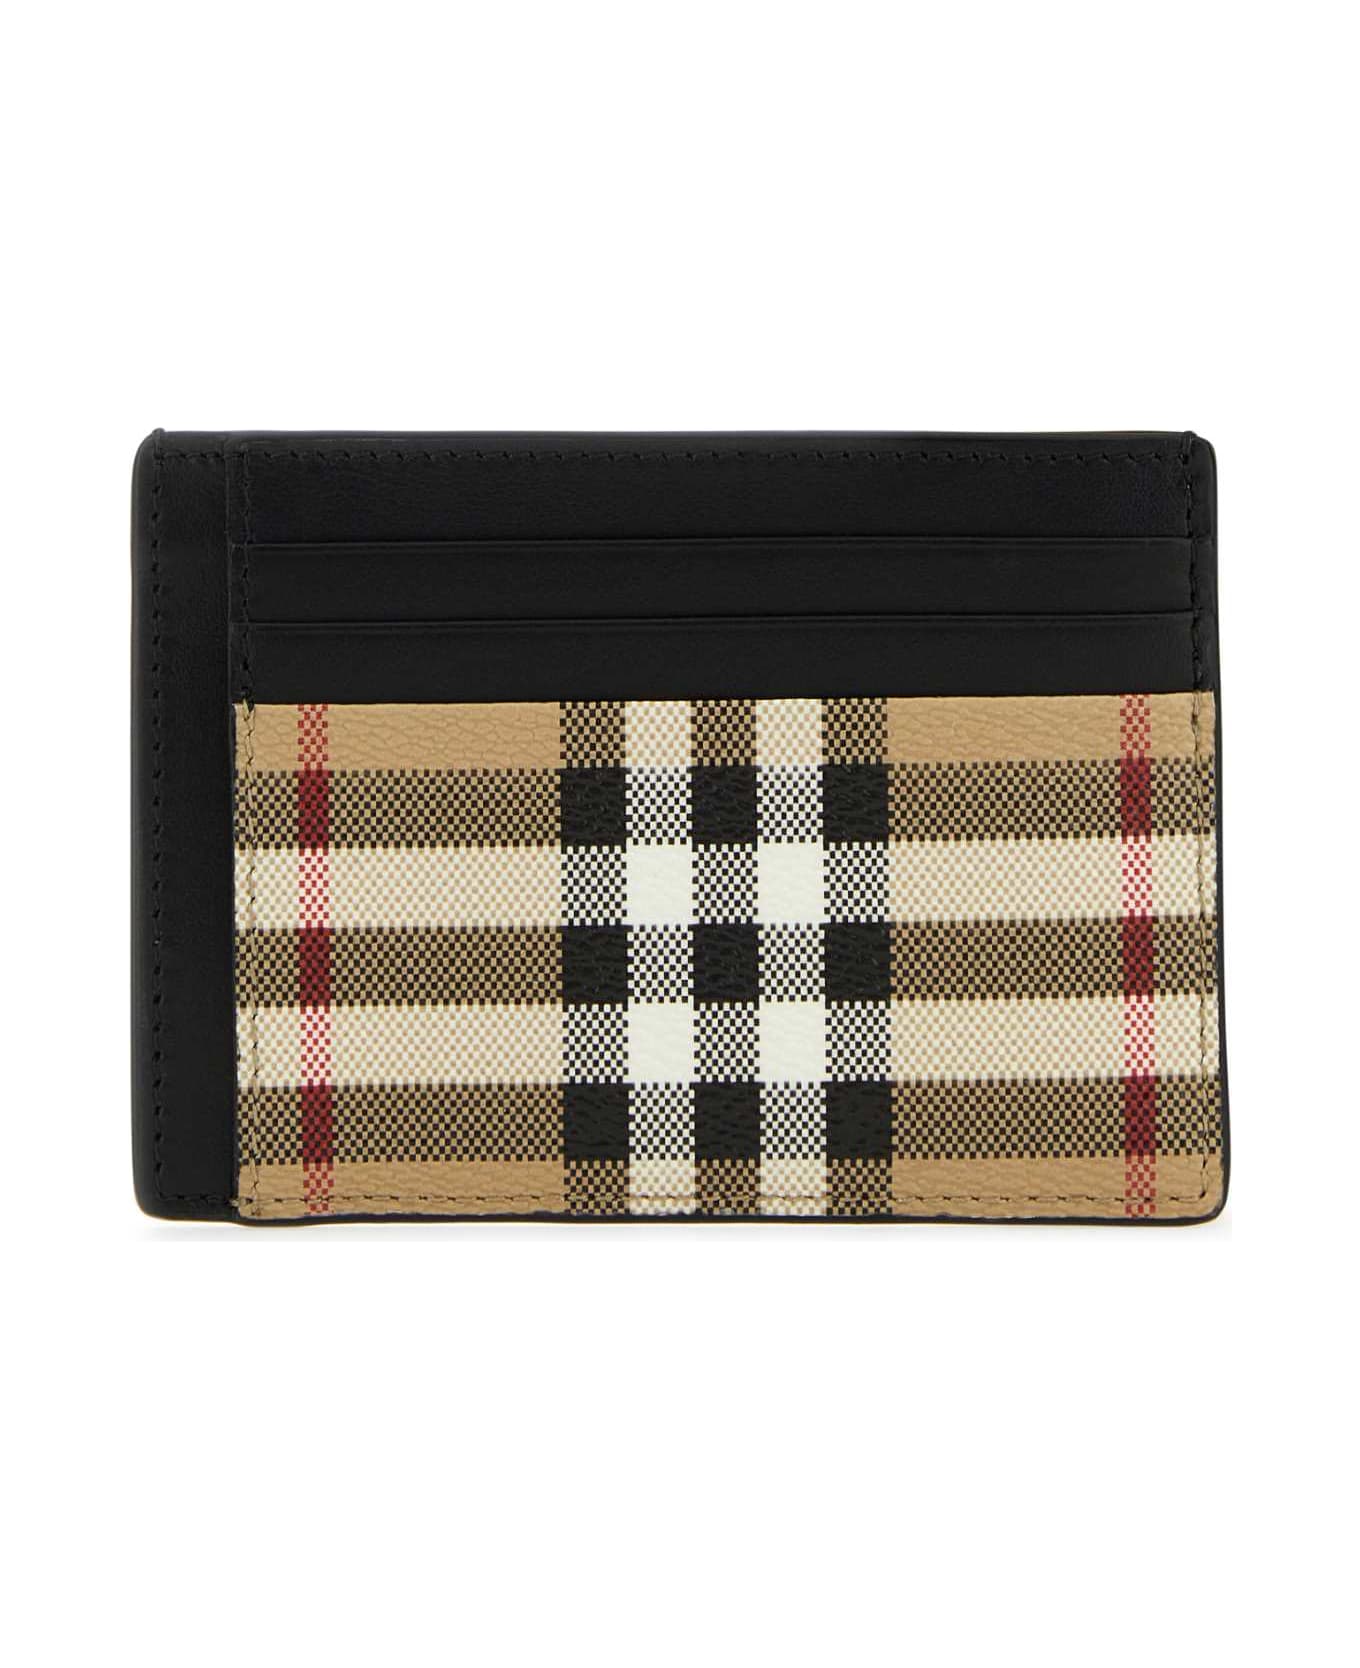 Burberry Printed Canvas Cardholder - ARCHIVEBEIGE